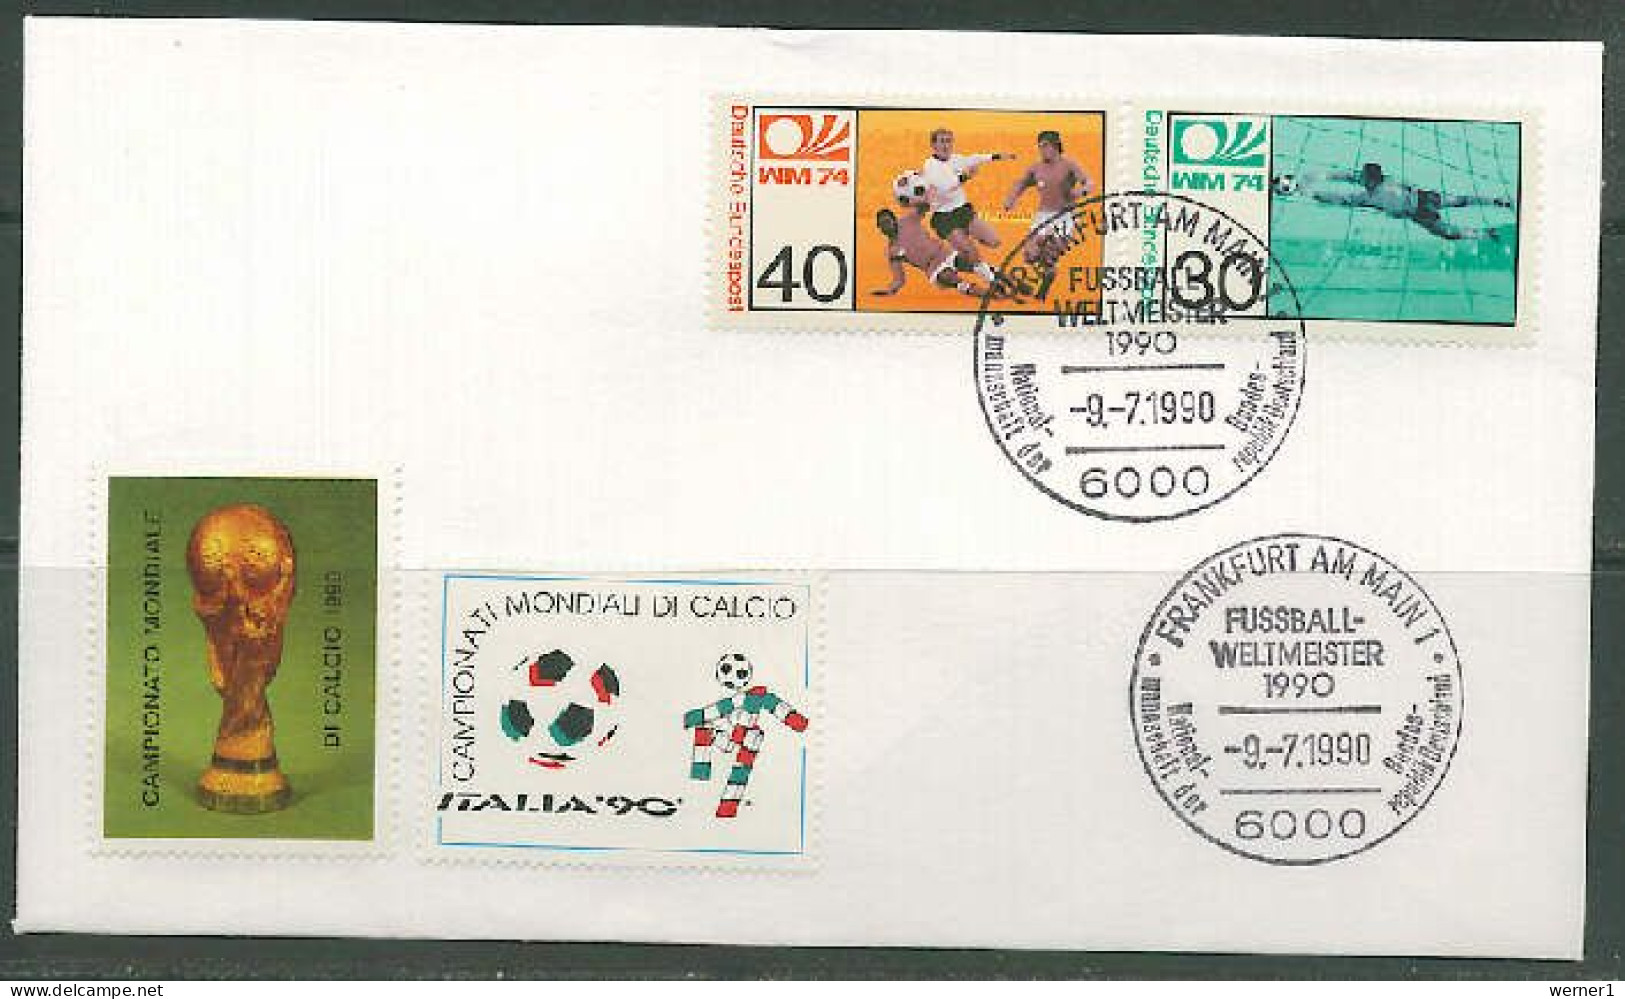 Germany 1990 Football Soccer World Cup Commemorative Cover, Germany World Cup Champion - 1990 – Italien